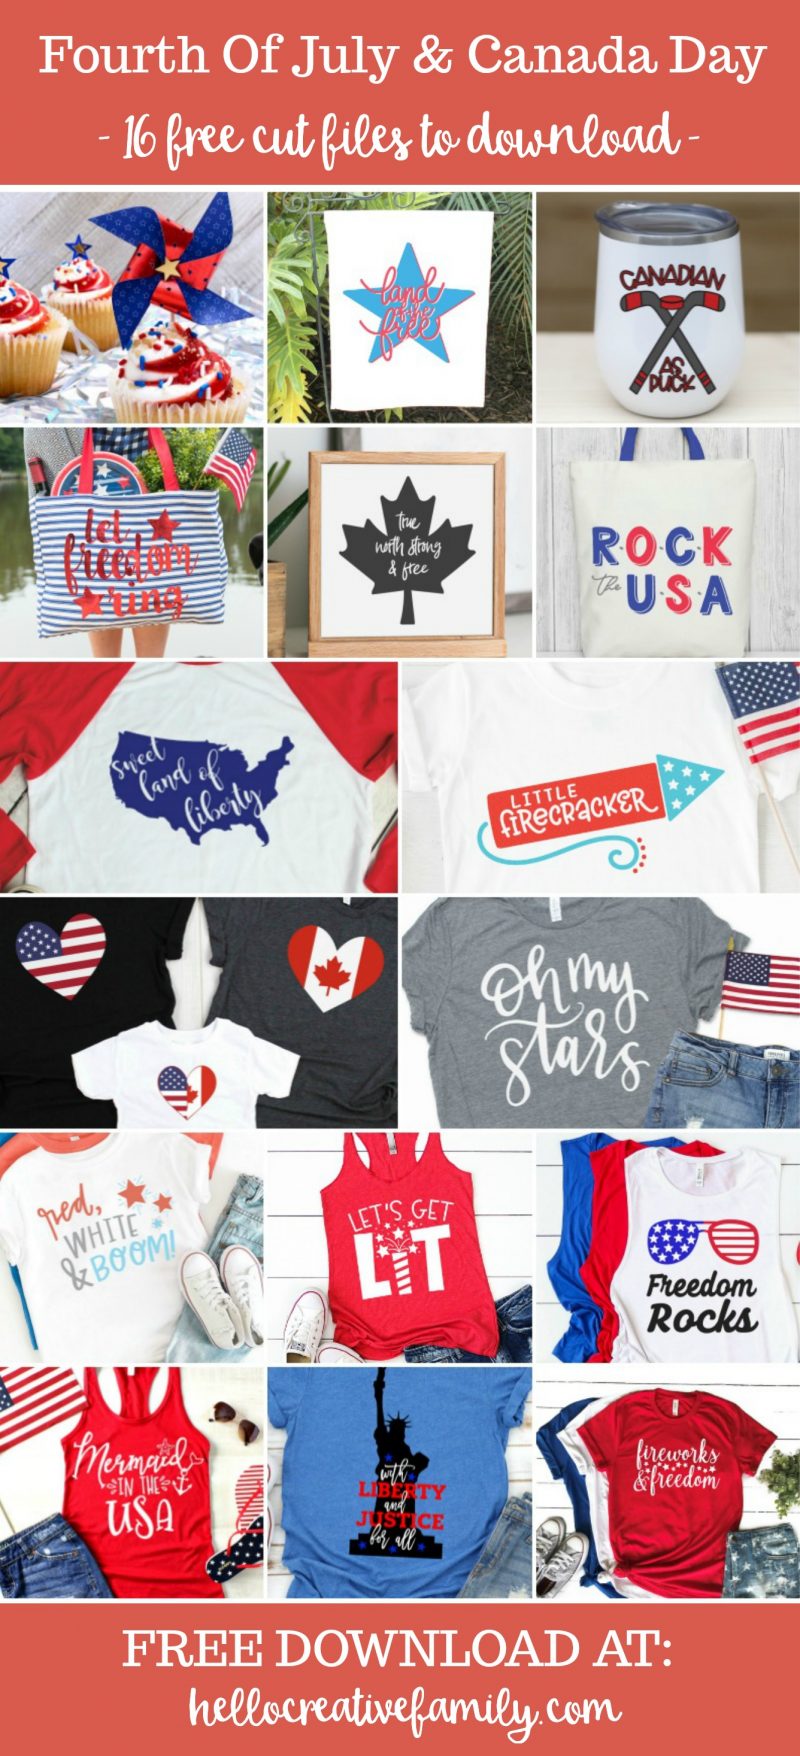 We're sharing 16 Free Canada Day and Fourth Of July SVG Cut Files including our very own Canadian Flay and US Flag Heart cut files. So pull out those Cricuts and Silhouettes and craft up an easy project! Whether you are Canadian or American we've got the patriotic SVG files you need for an awesome July! #Cricut #Silhouette #CanadaDay #FourthOfJuly #SVG